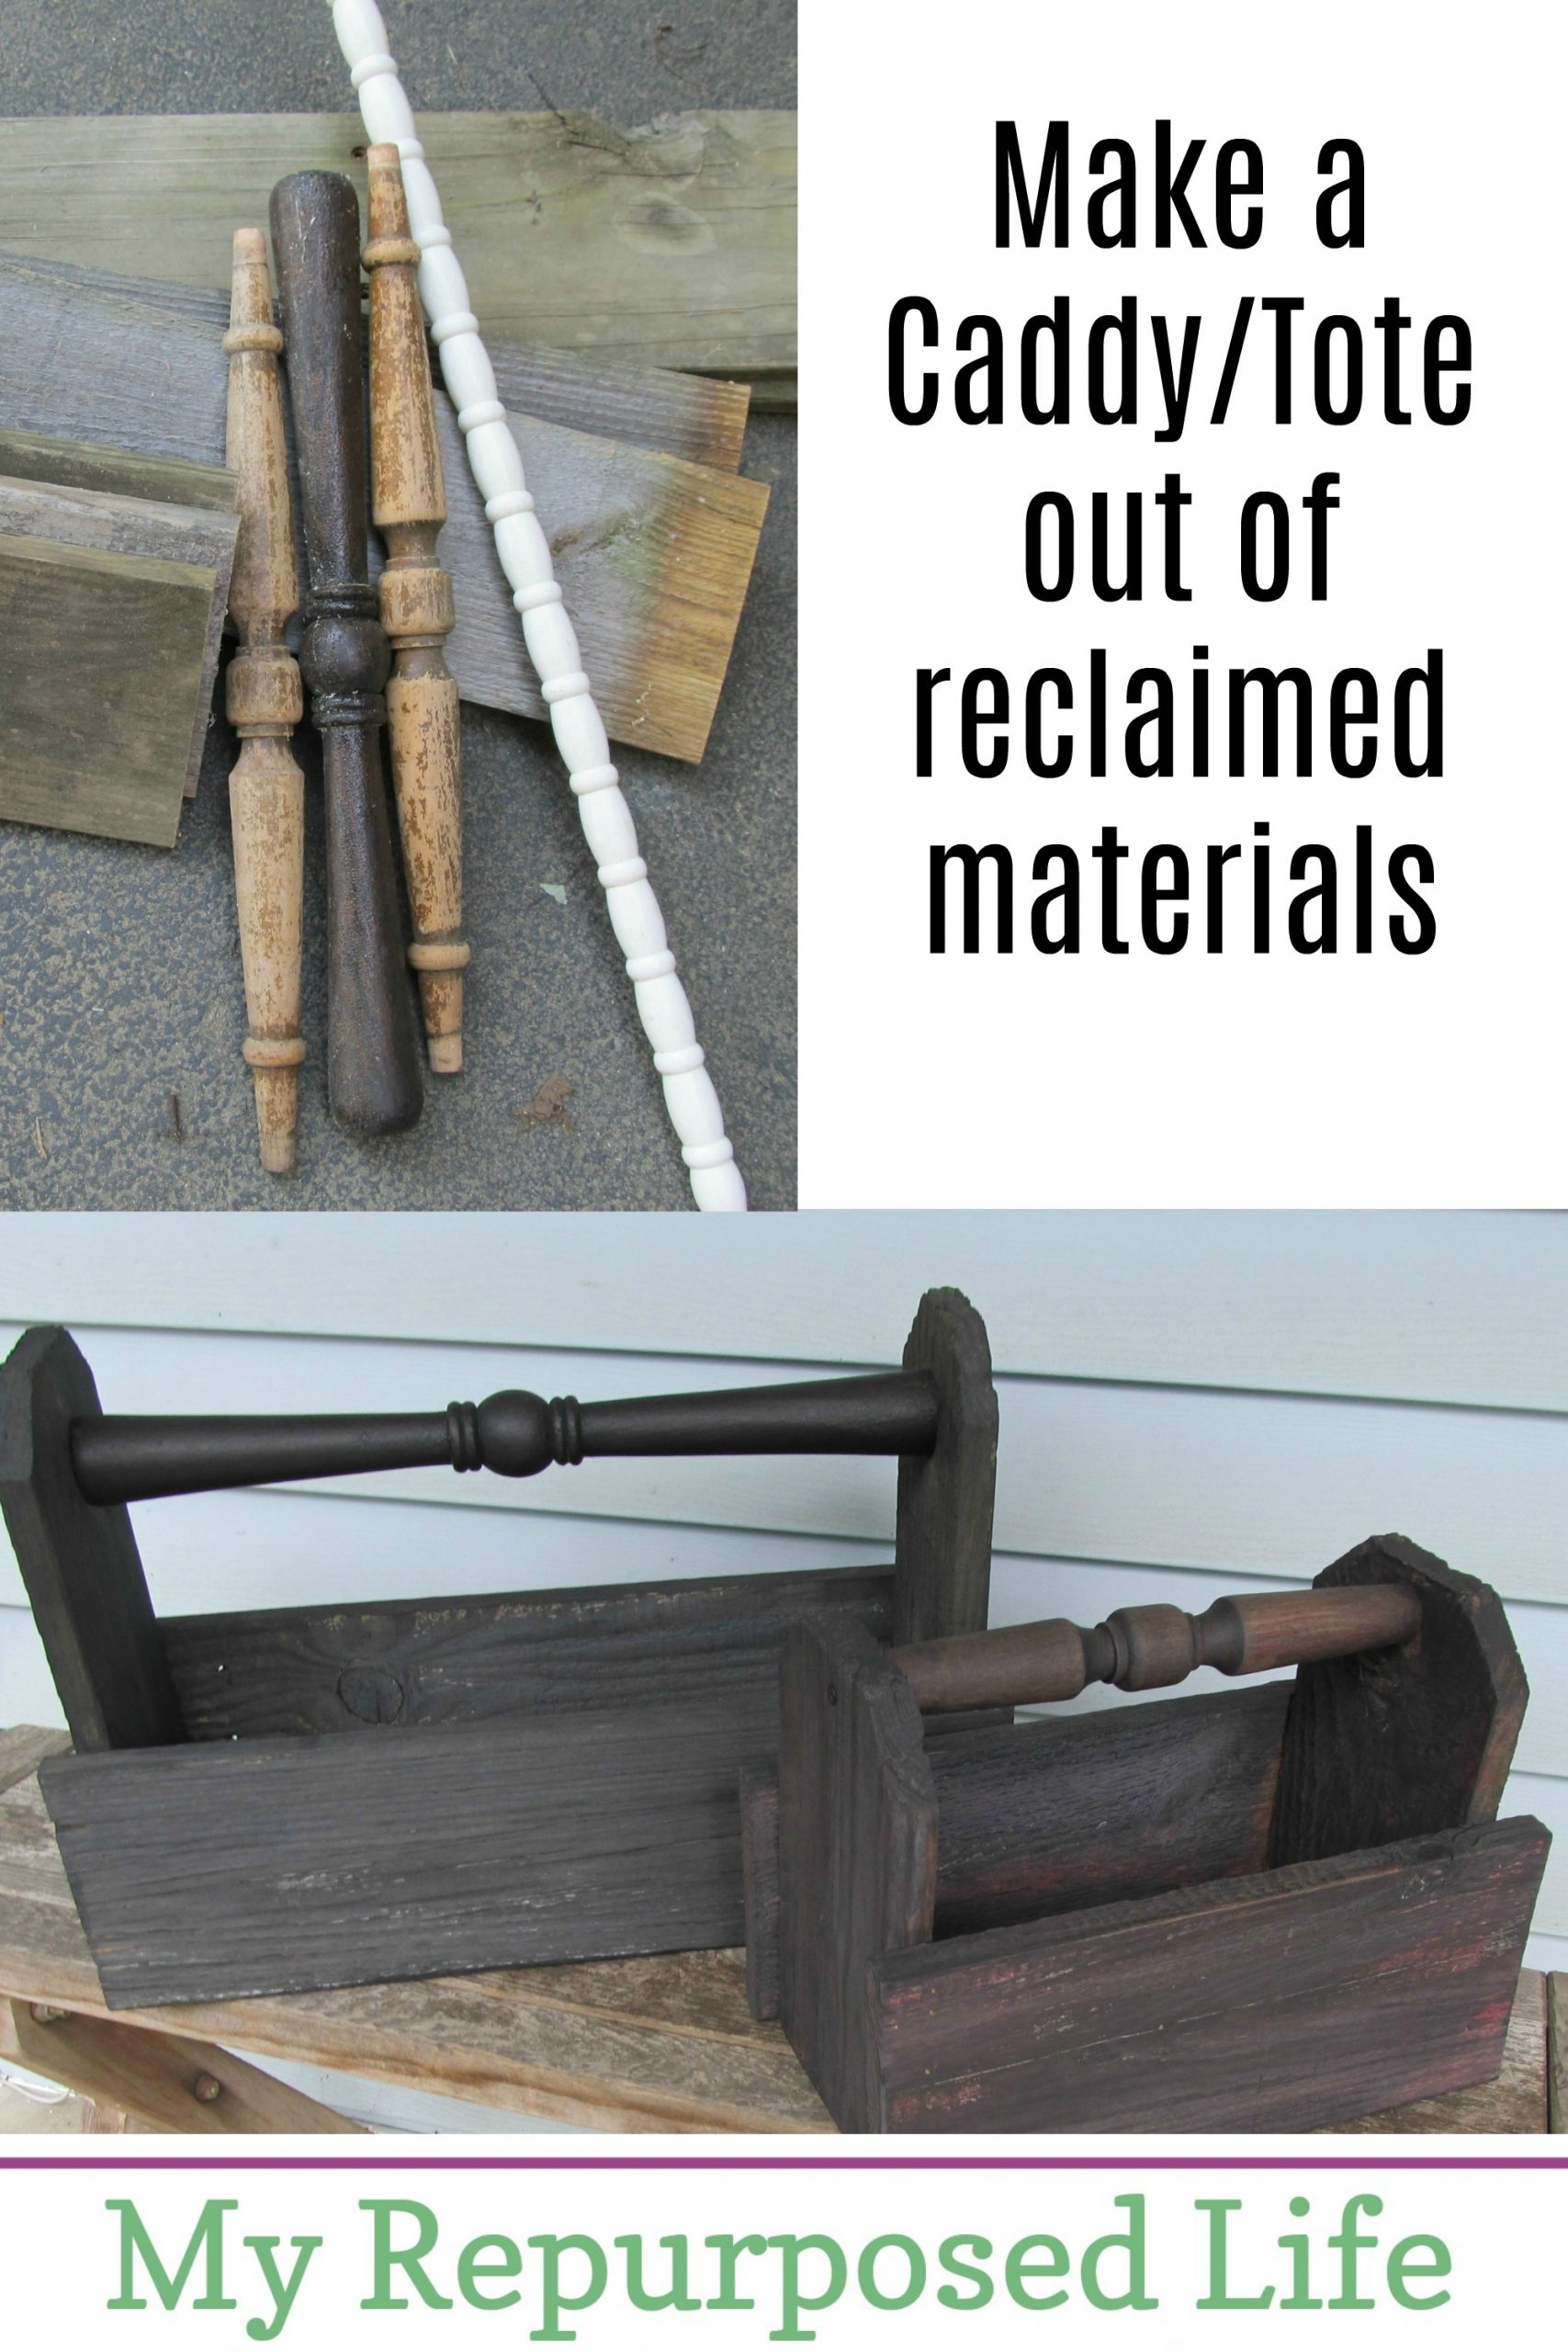 How to make a diy wooden caddy using reclaimed materials such as fencing and chair parts. Step by step tutorial so you can make one of these today! #MyRepurposedLife #relcaimed #fence #spindles #wooden #caddy via @repurposedlife